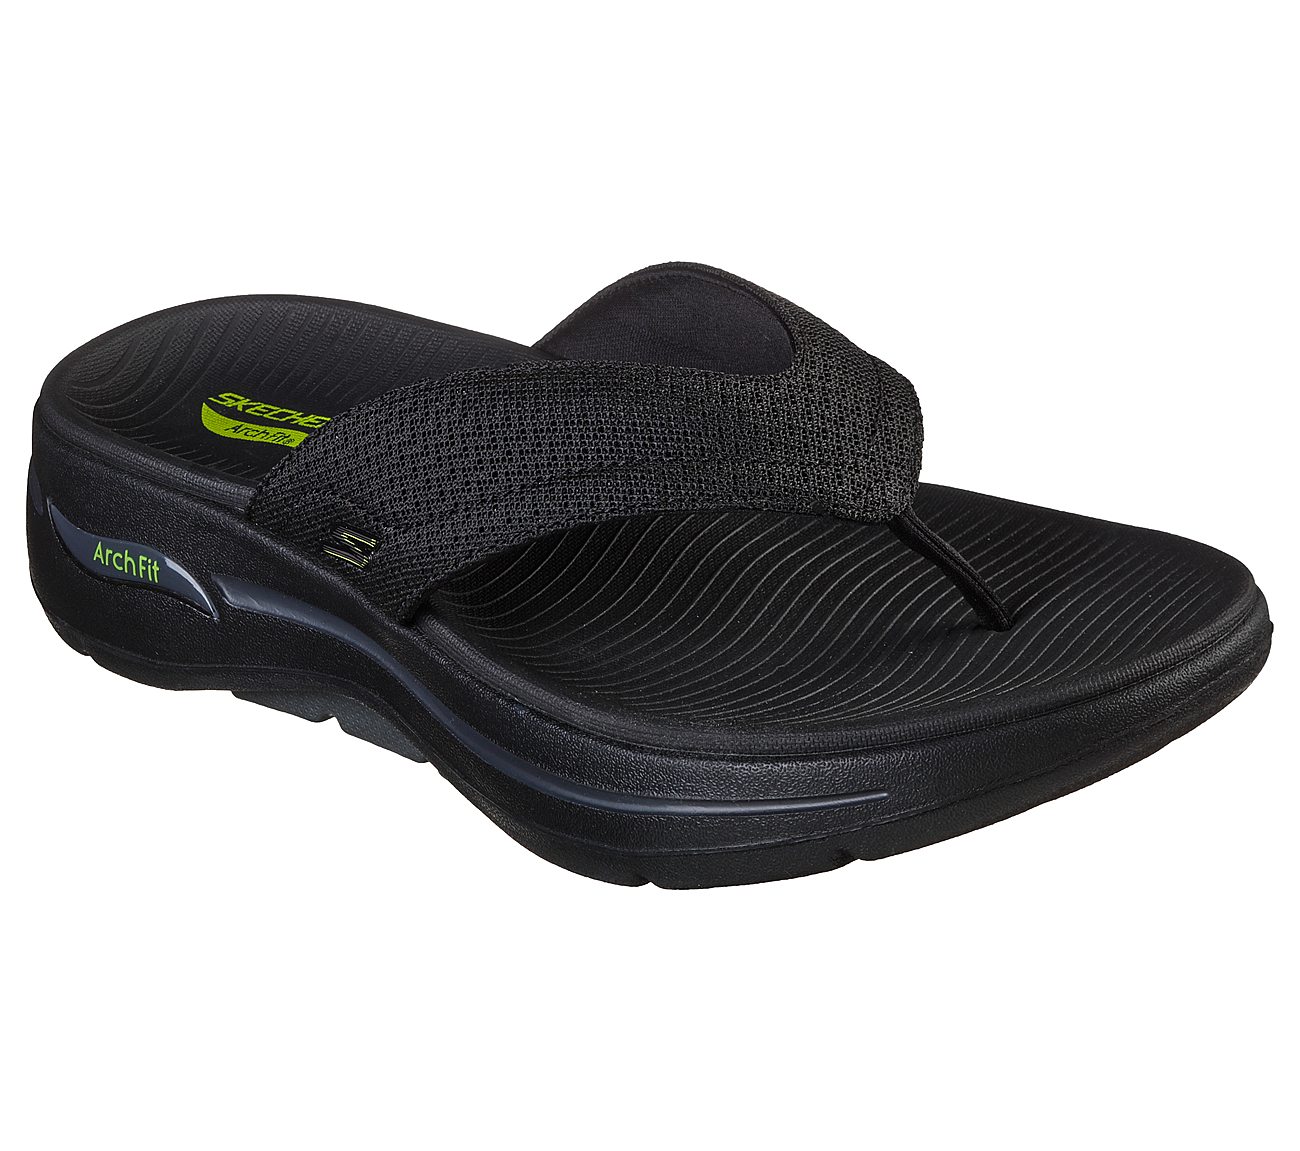 Skechers Navy Go Walk Arch Fit Wondrous Women Slippers  Style ID 140235   India